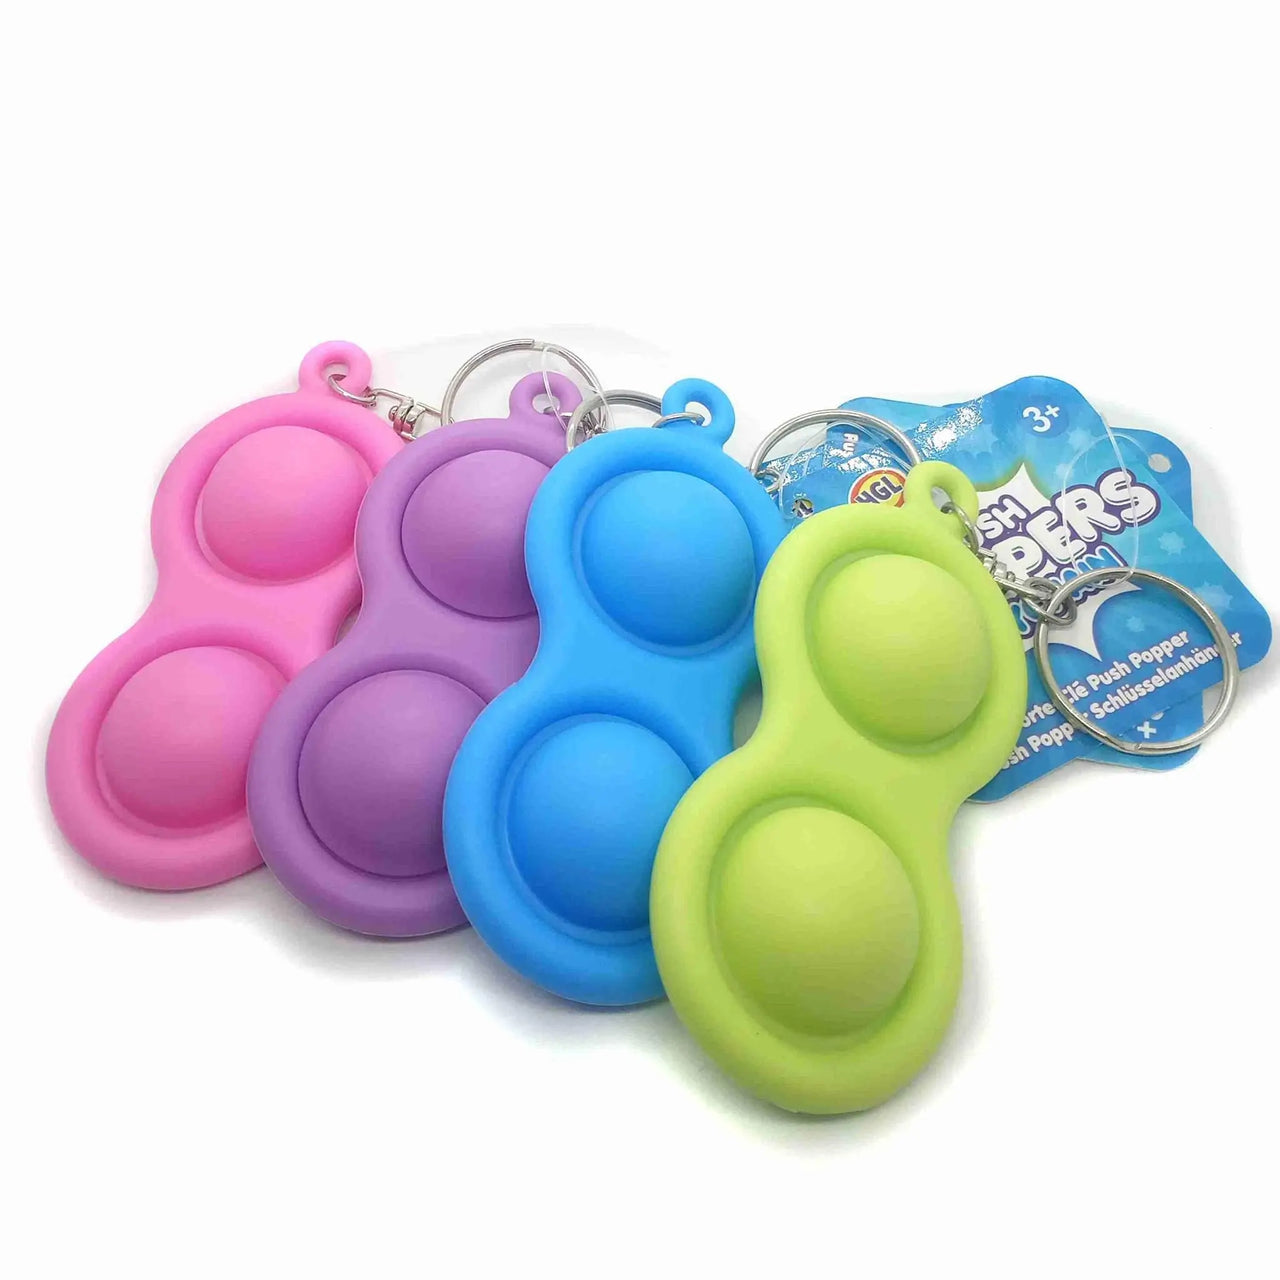 buy-push-poppers-silicone-pop-it-keyring-simpl-dimpl-Buy-fidgets-online-uk-grown-ups-adult-fidgets-independent-store_20_1024x1024@2x